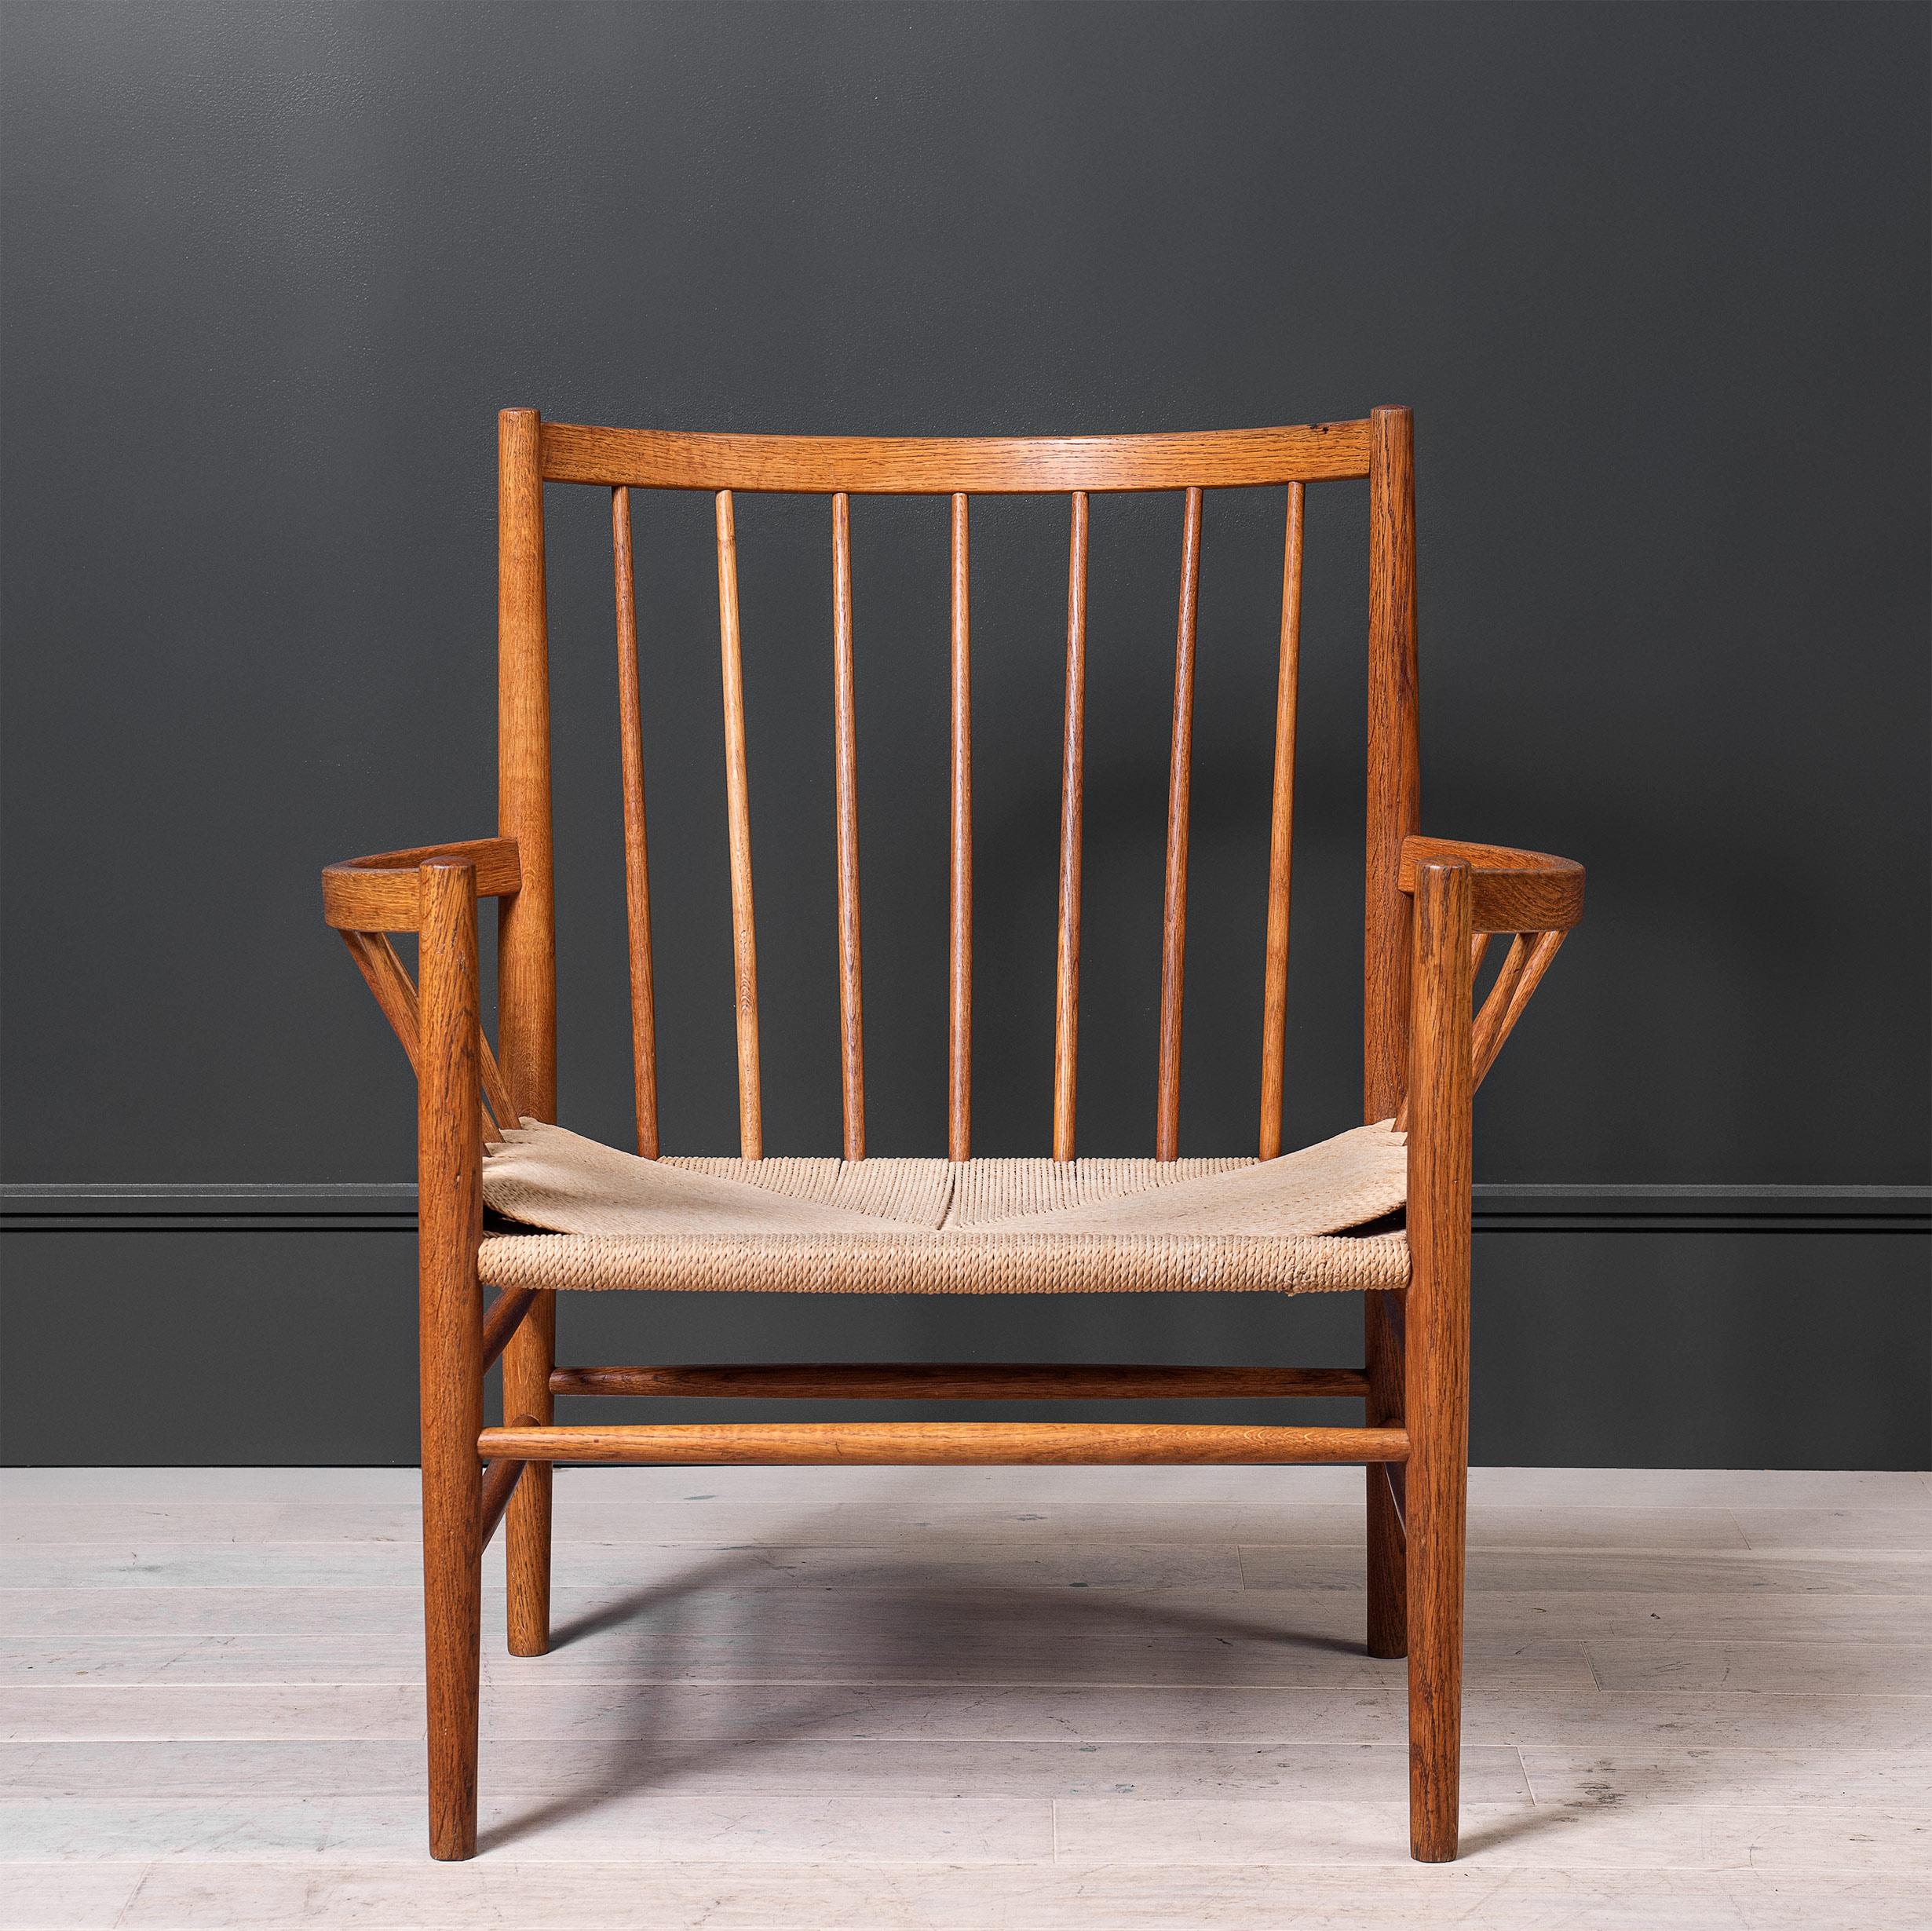 An original Jorgen Baekmark - FDB Møbler’s lounge chair, designed by Jørgen Bækmark in 1963. A very attractive oak spindle back chair which is based on the 1950s chair collection J80 with very distinctive and rounded armrests and back. It is one of